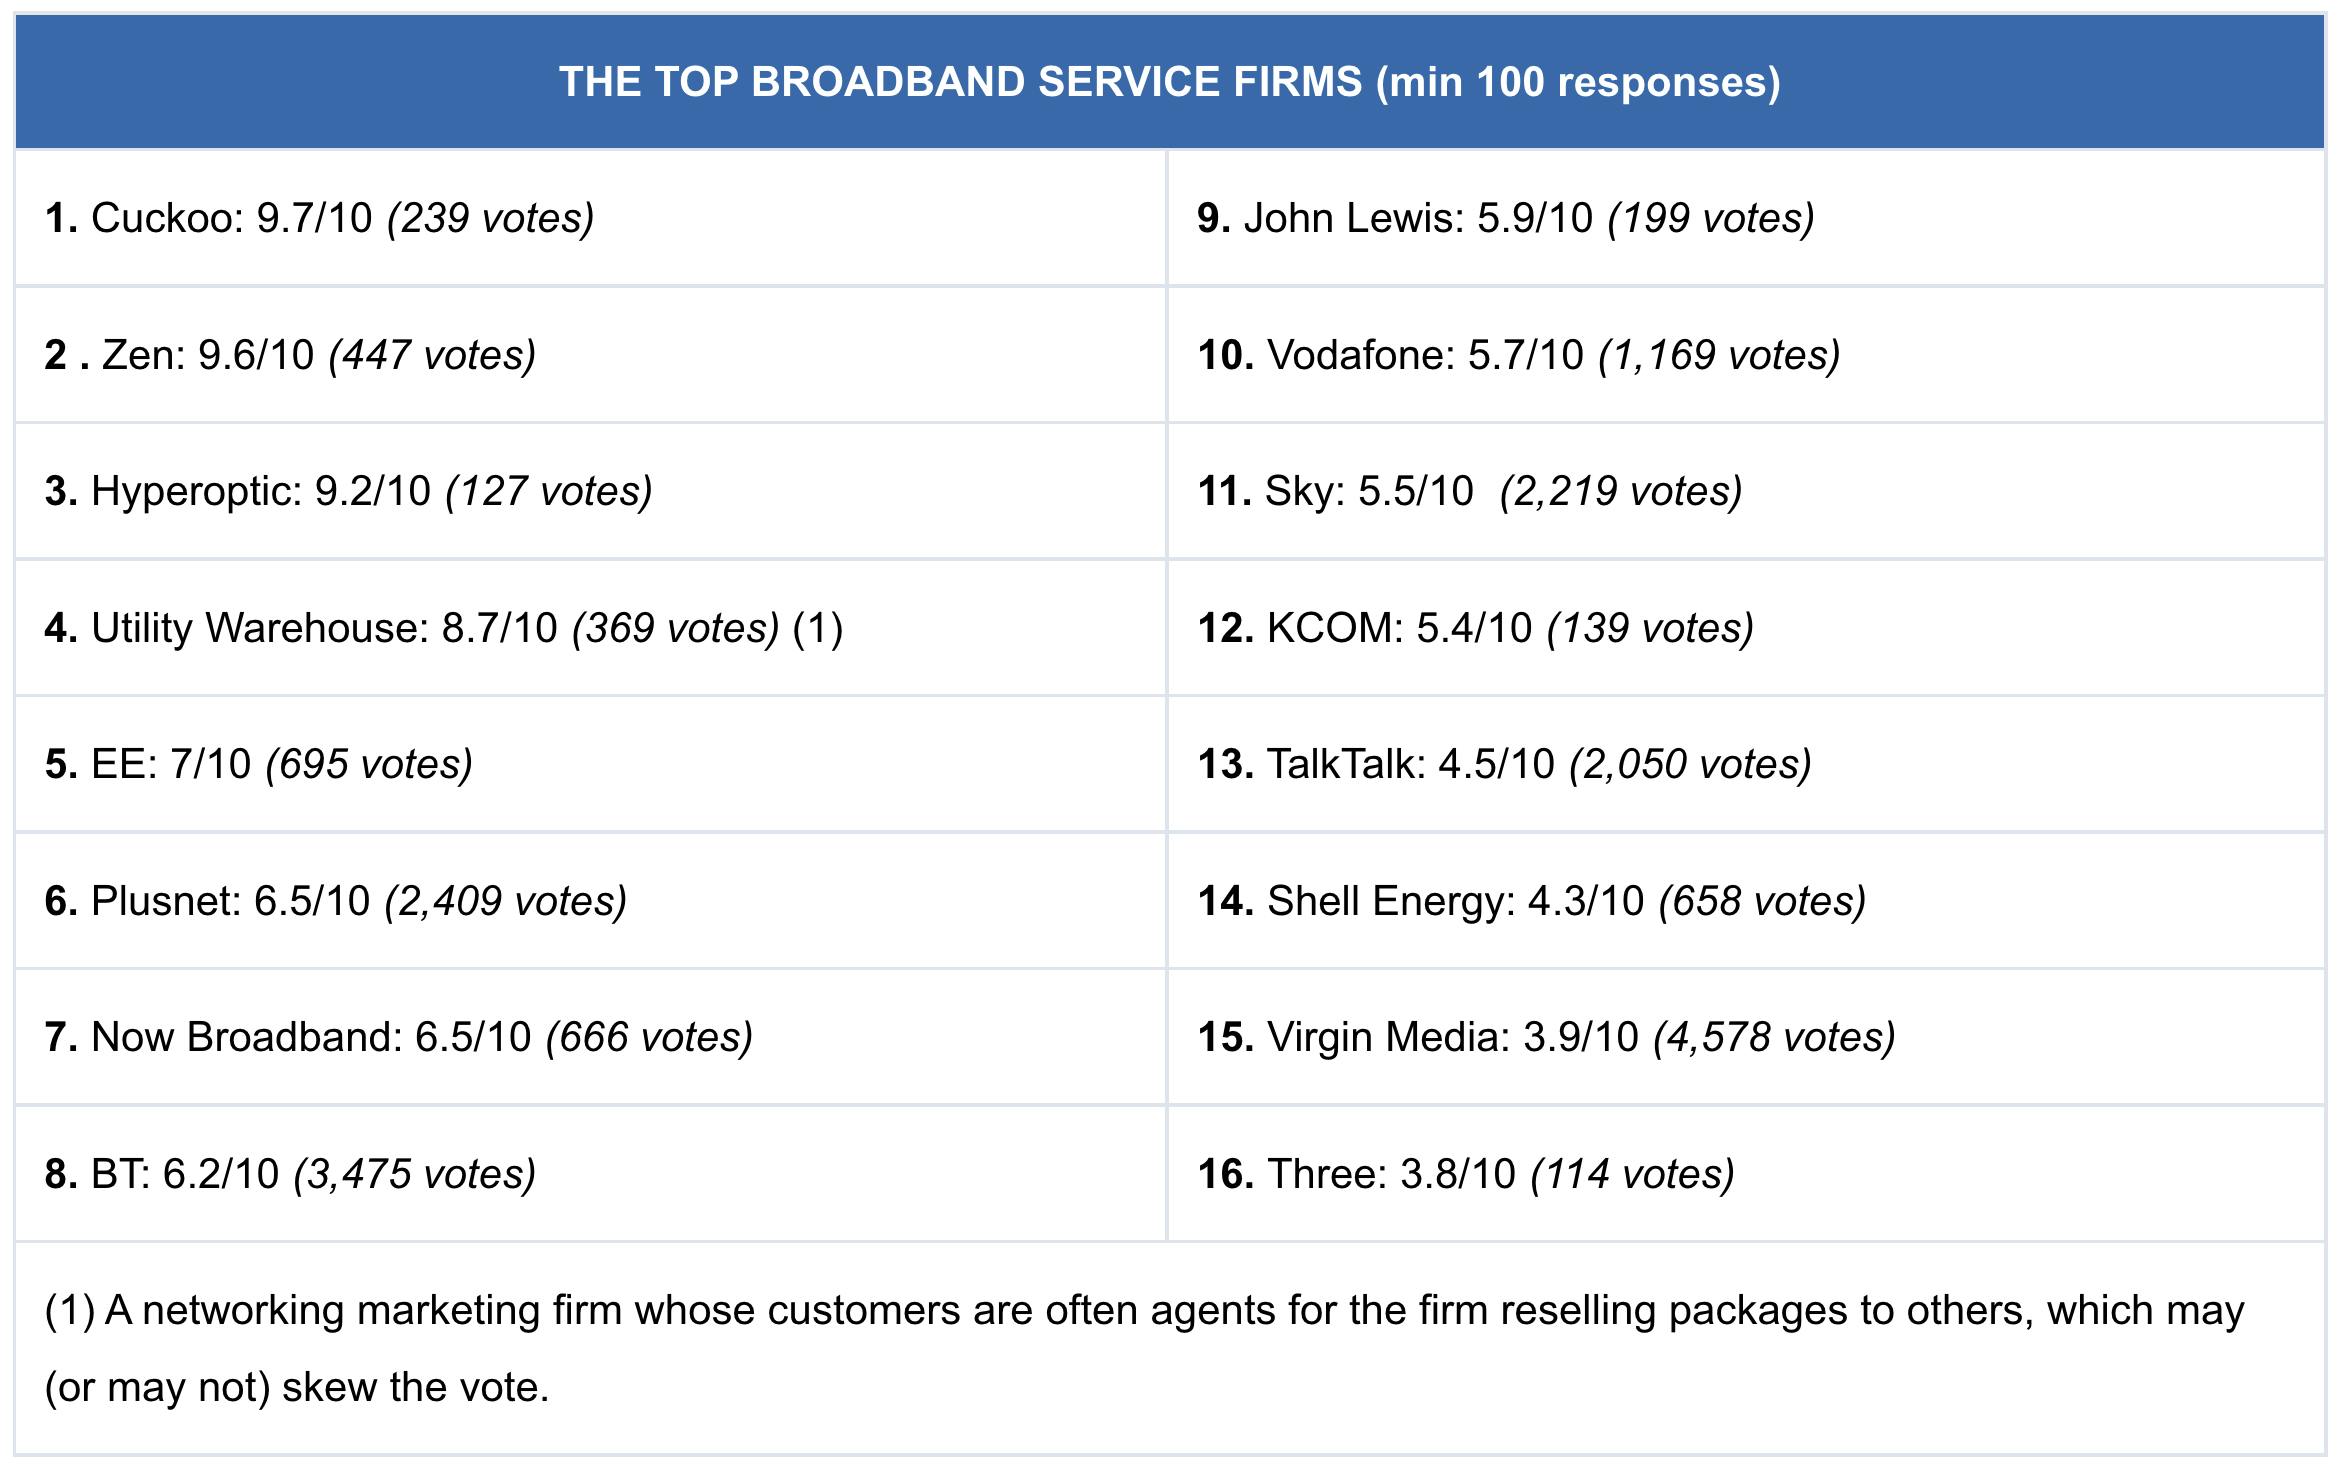 Top broadband firms for service - Feb 22